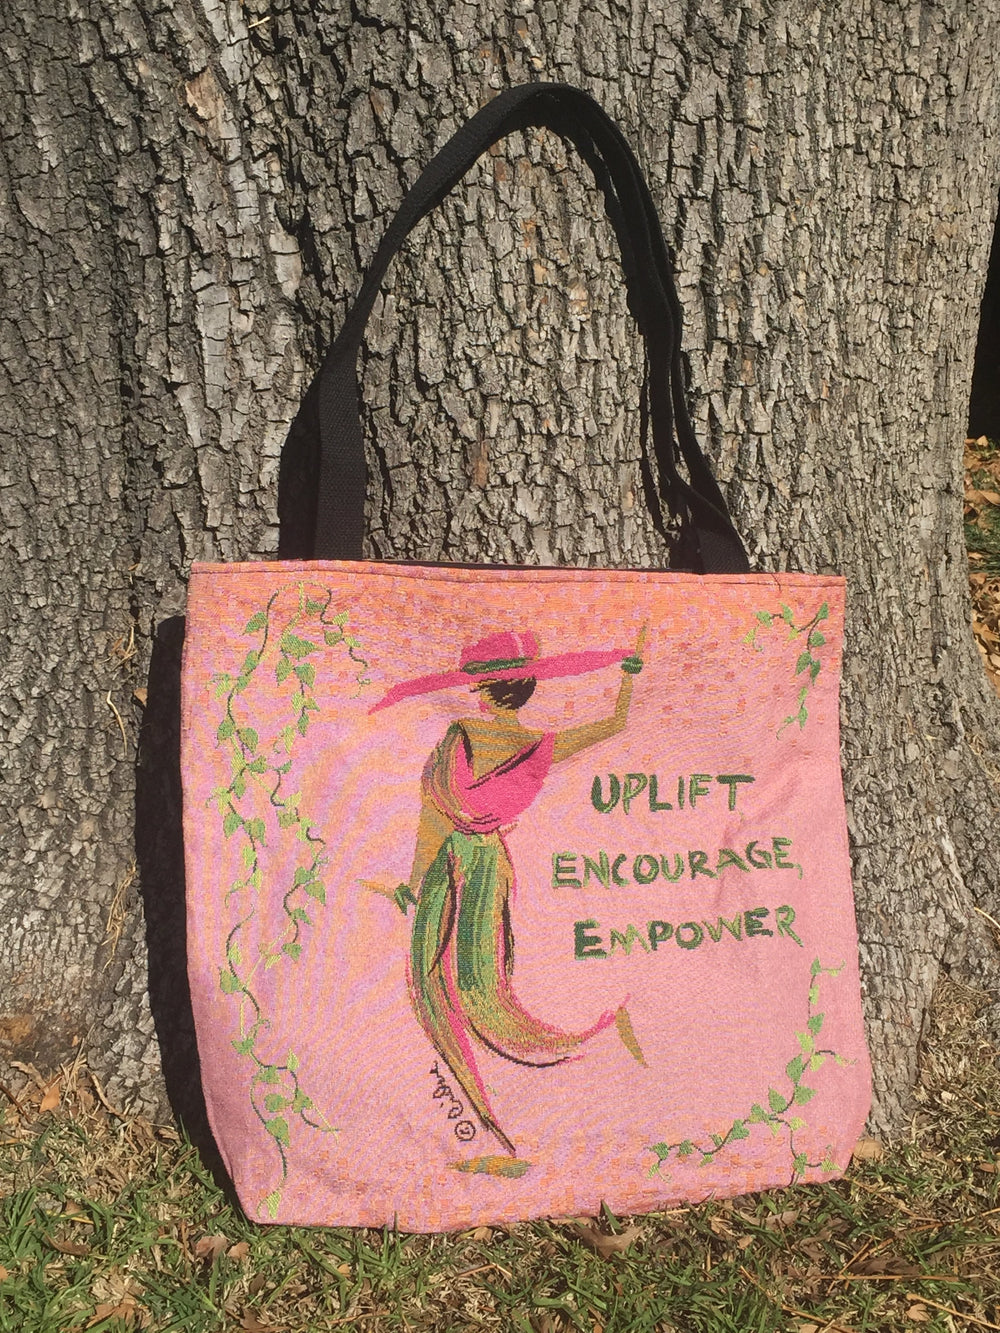 Uplift and Empower Woven Tote Bag-Woven Tote Bag-Cidne Wallace-17x17 inches-Cotton-The Black Art Depot